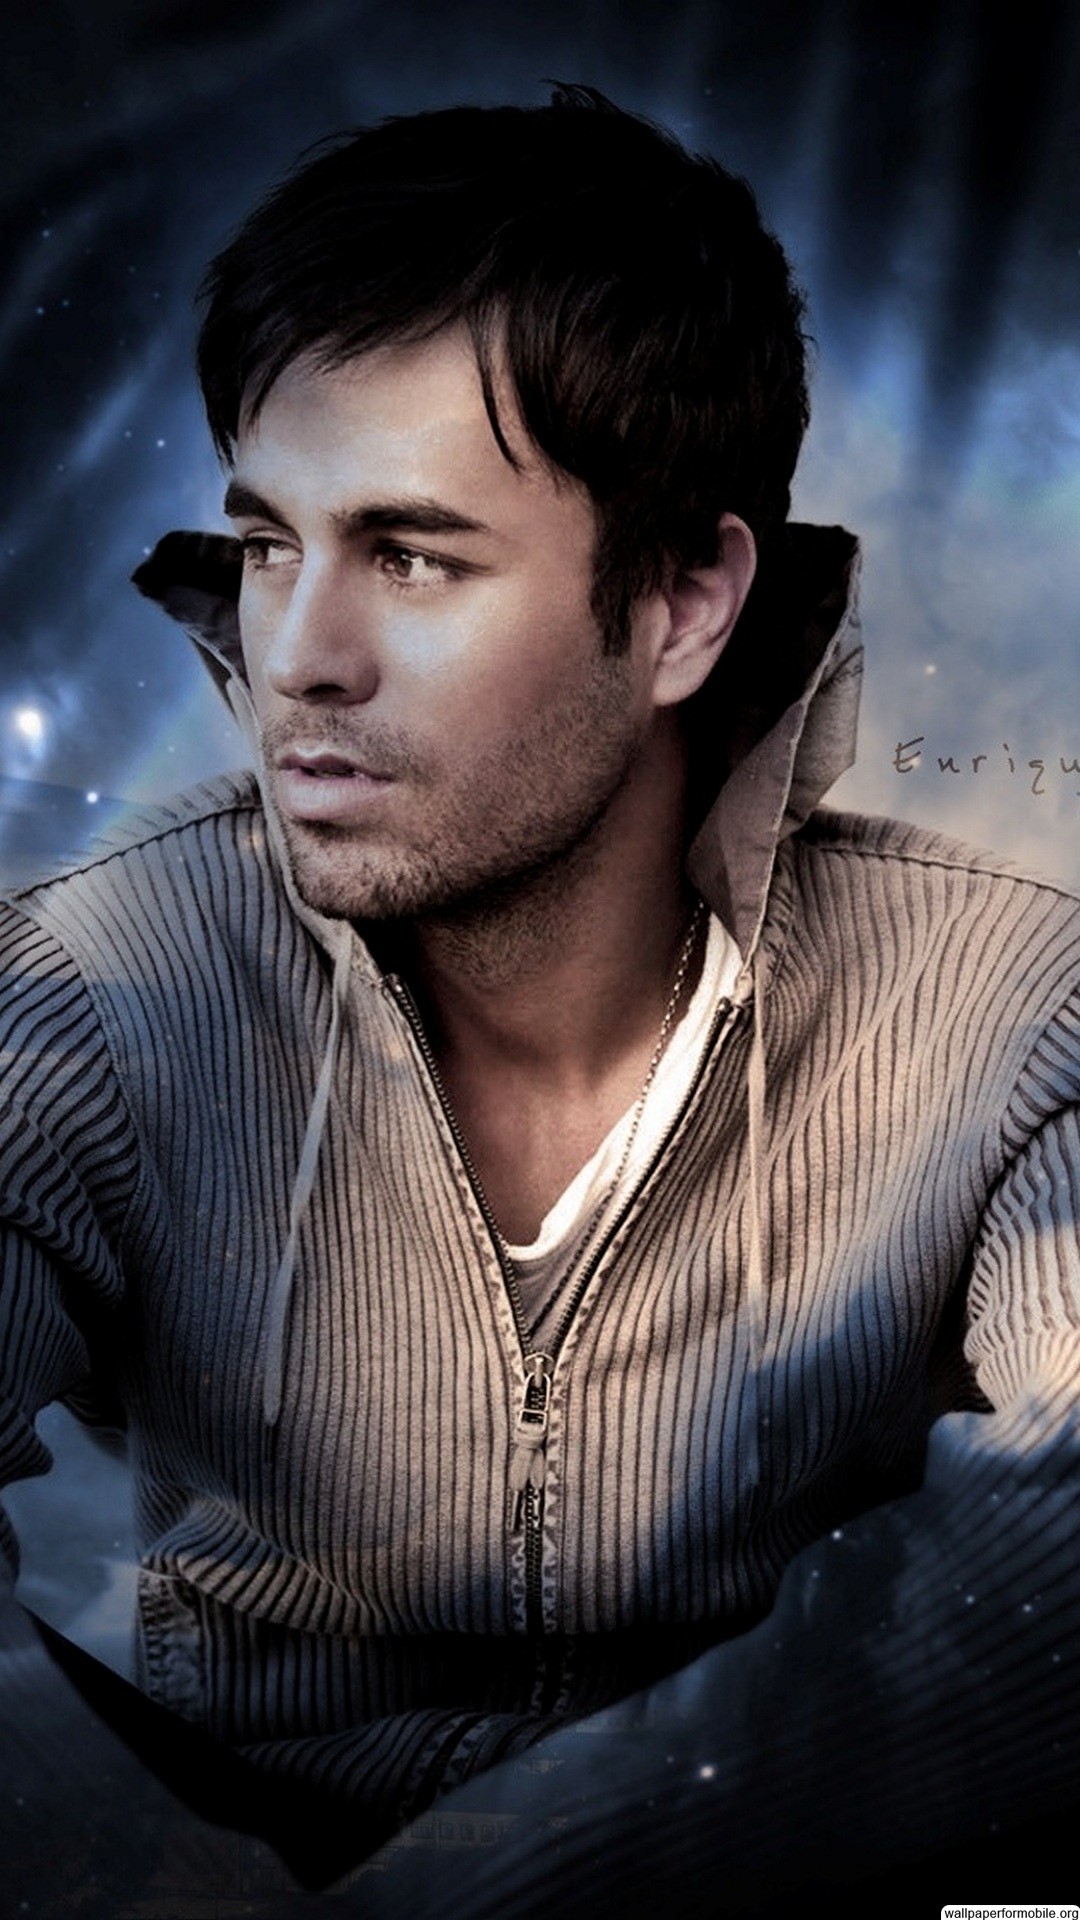 1080x1920 Download free enrique iglesias wallpapers for your mobile phone